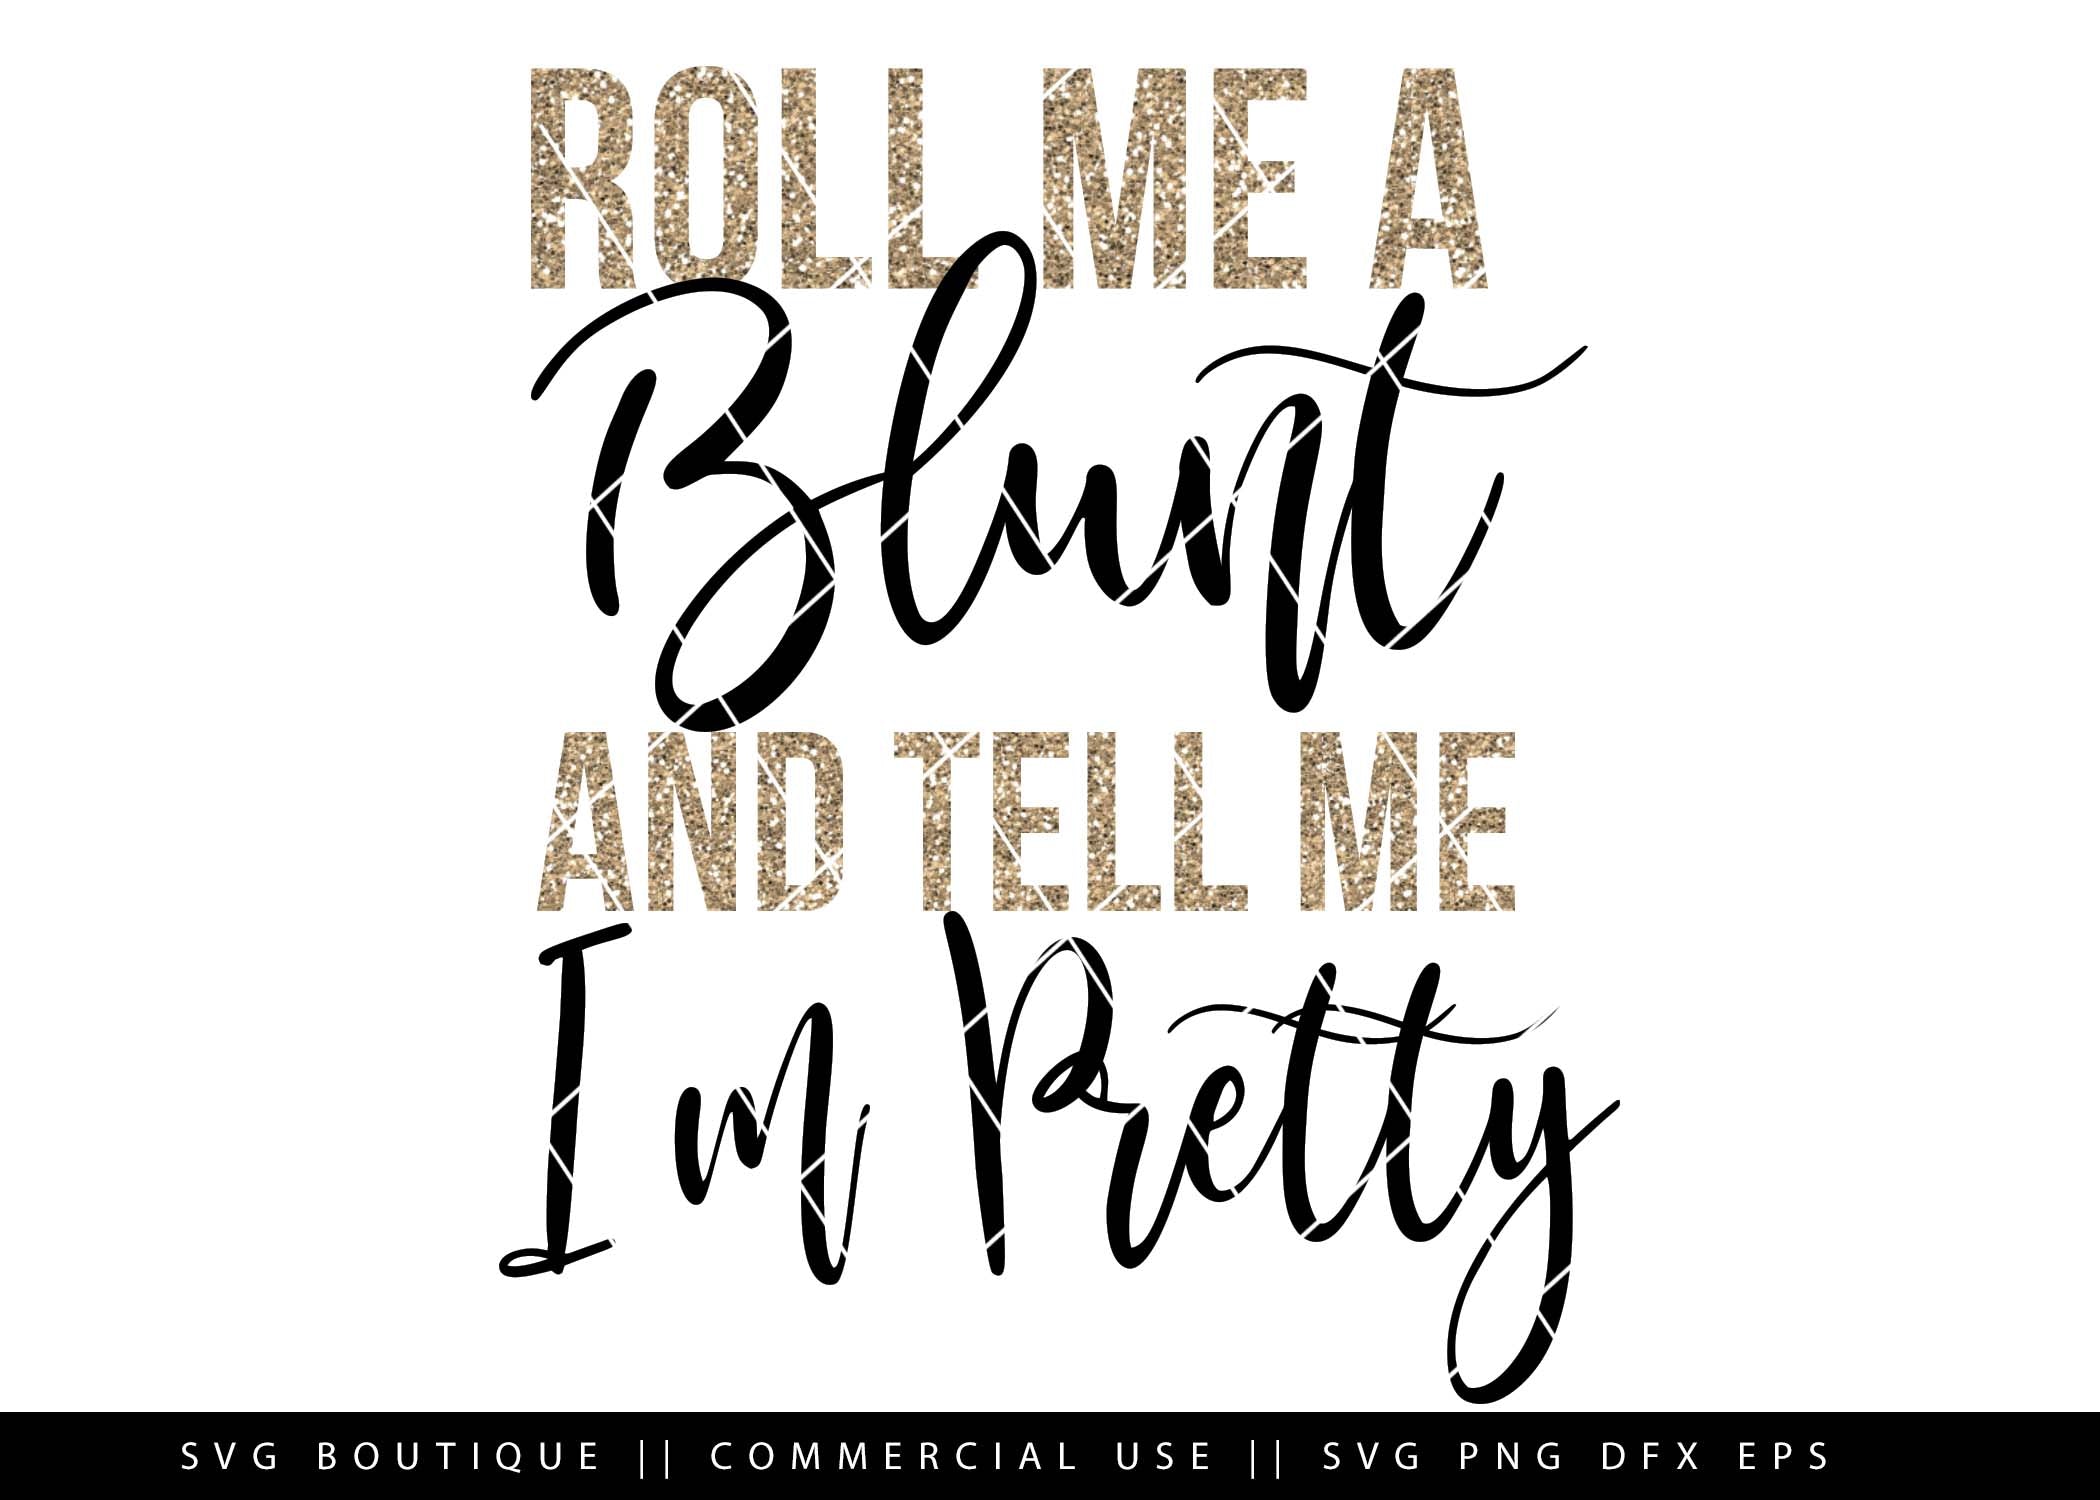 Download Roll Me A Blunt And Tell Me I M Pretty Weed Dope Svg Files Cut Fil Svg Boutique